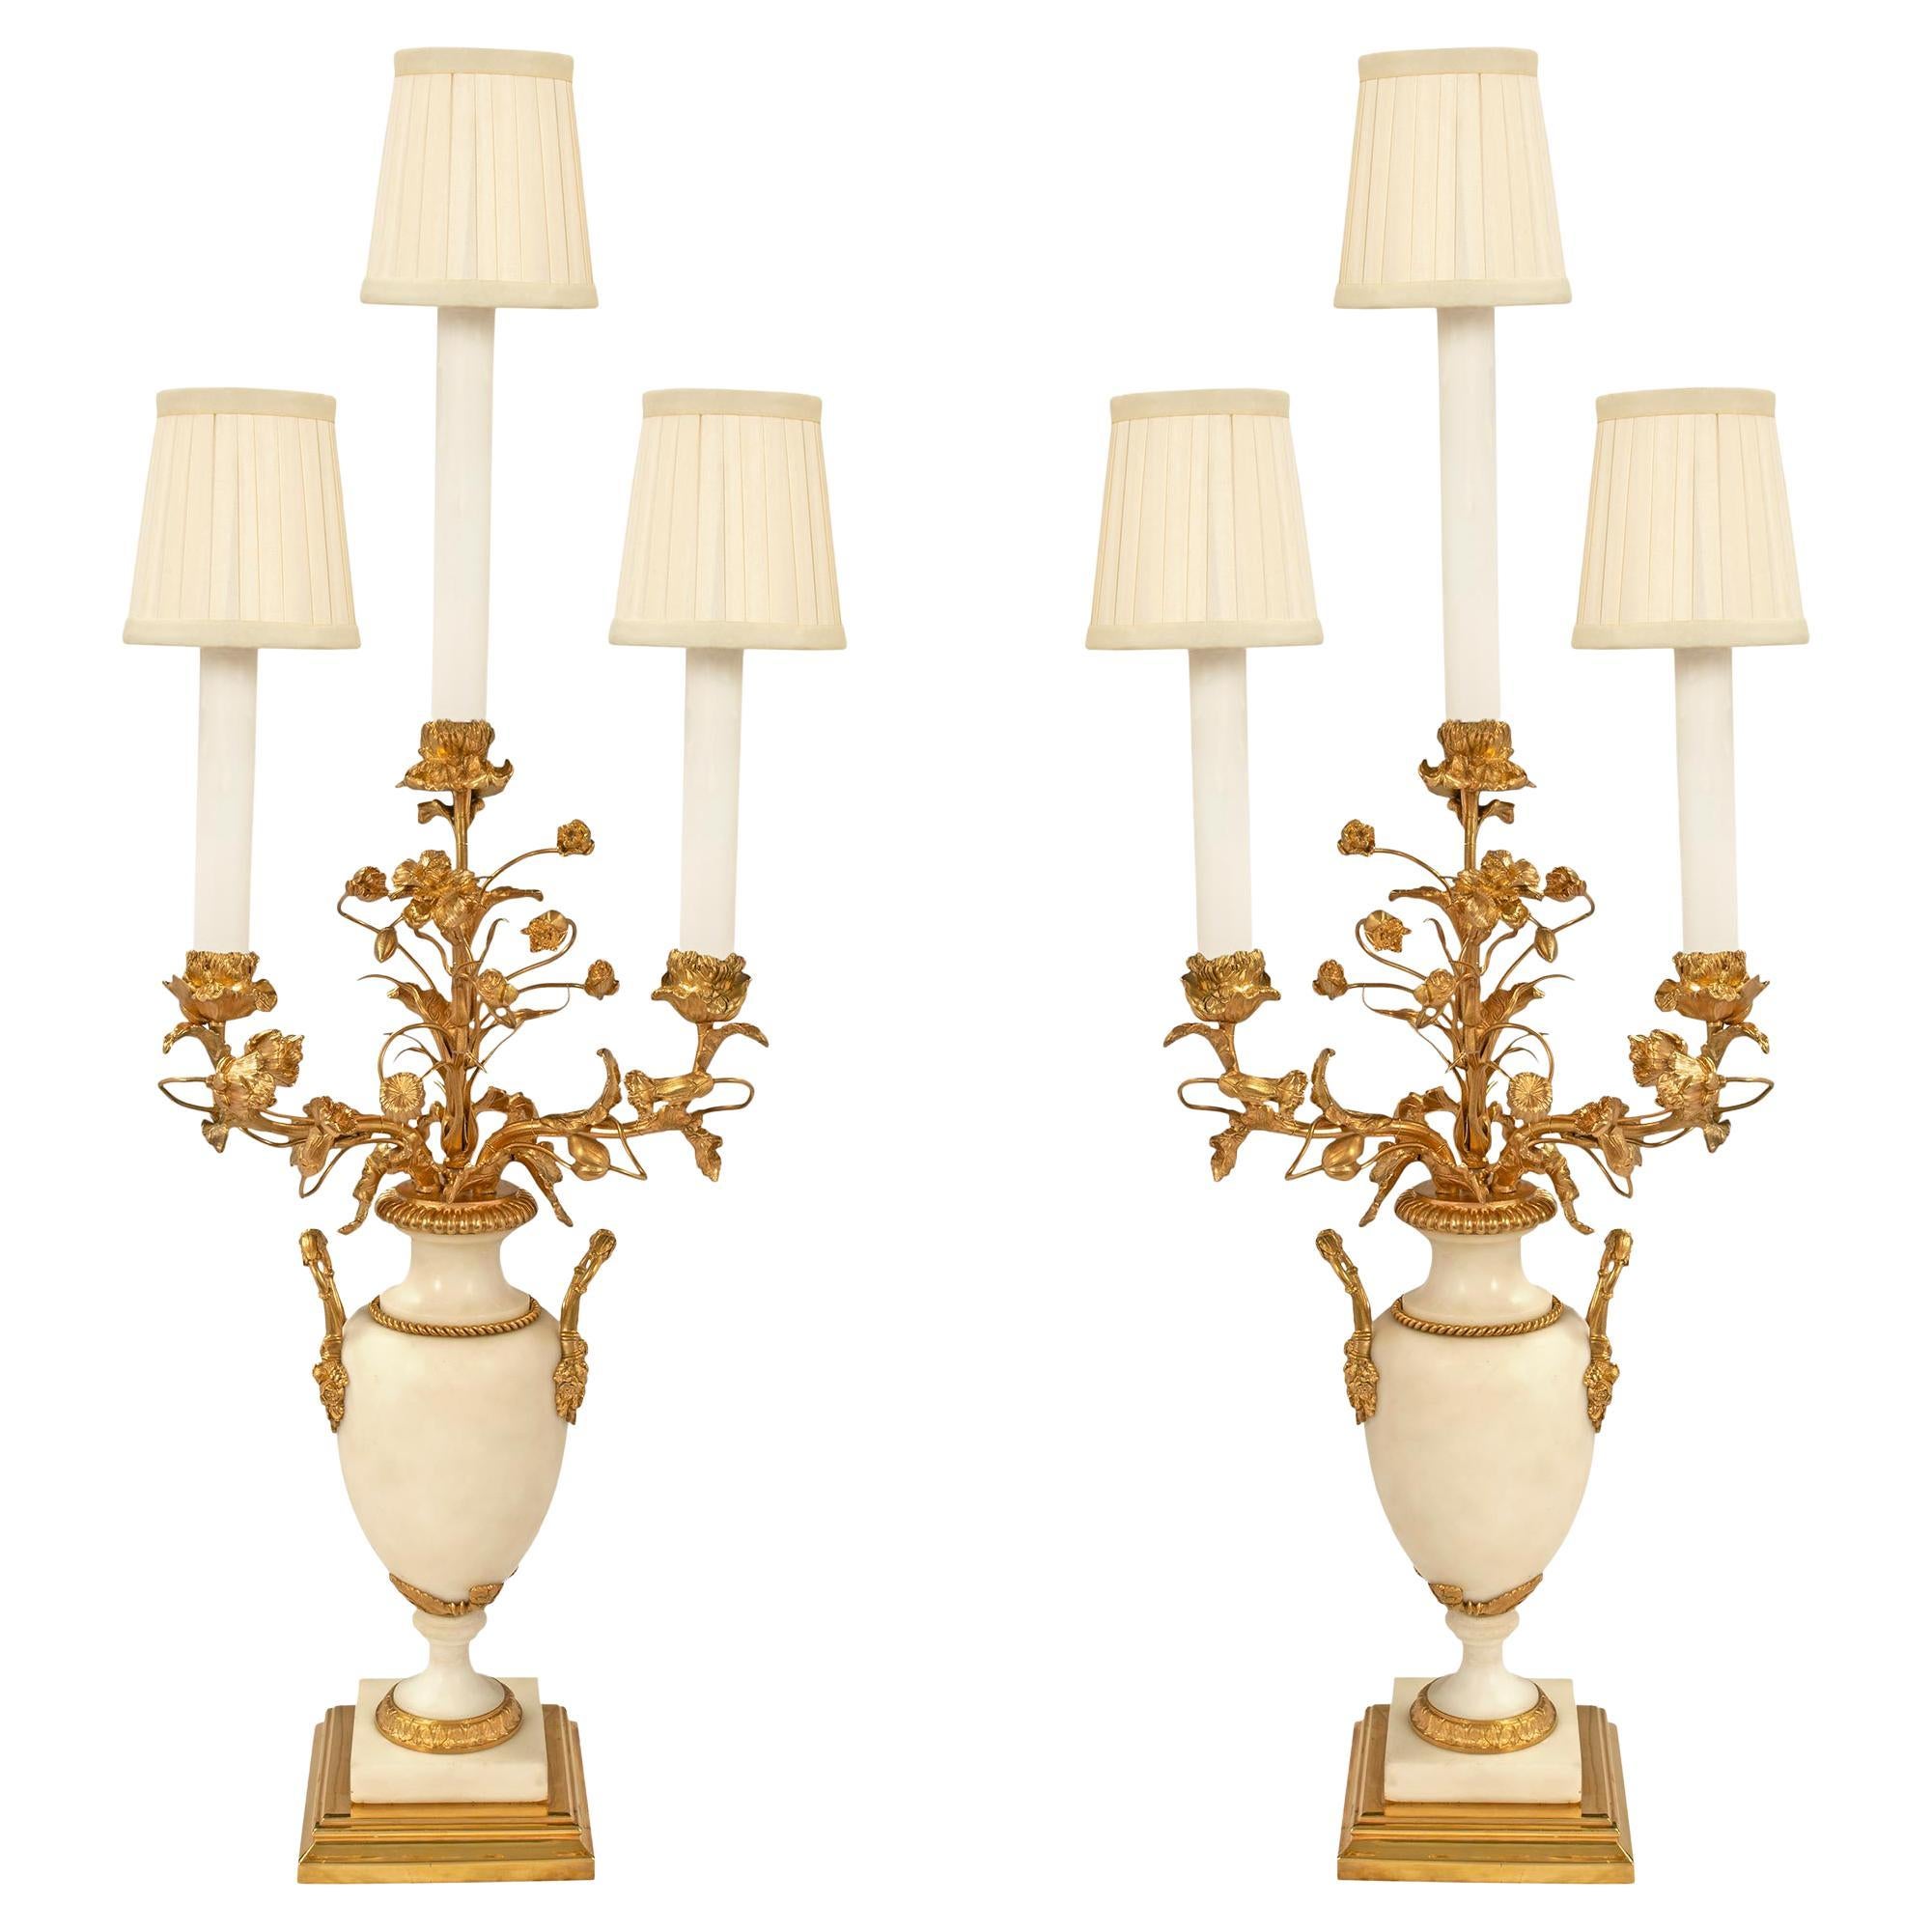 Pair of French 19th Century Louis XVI Style Carrara Marble & Ormolu Candelabras For Sale